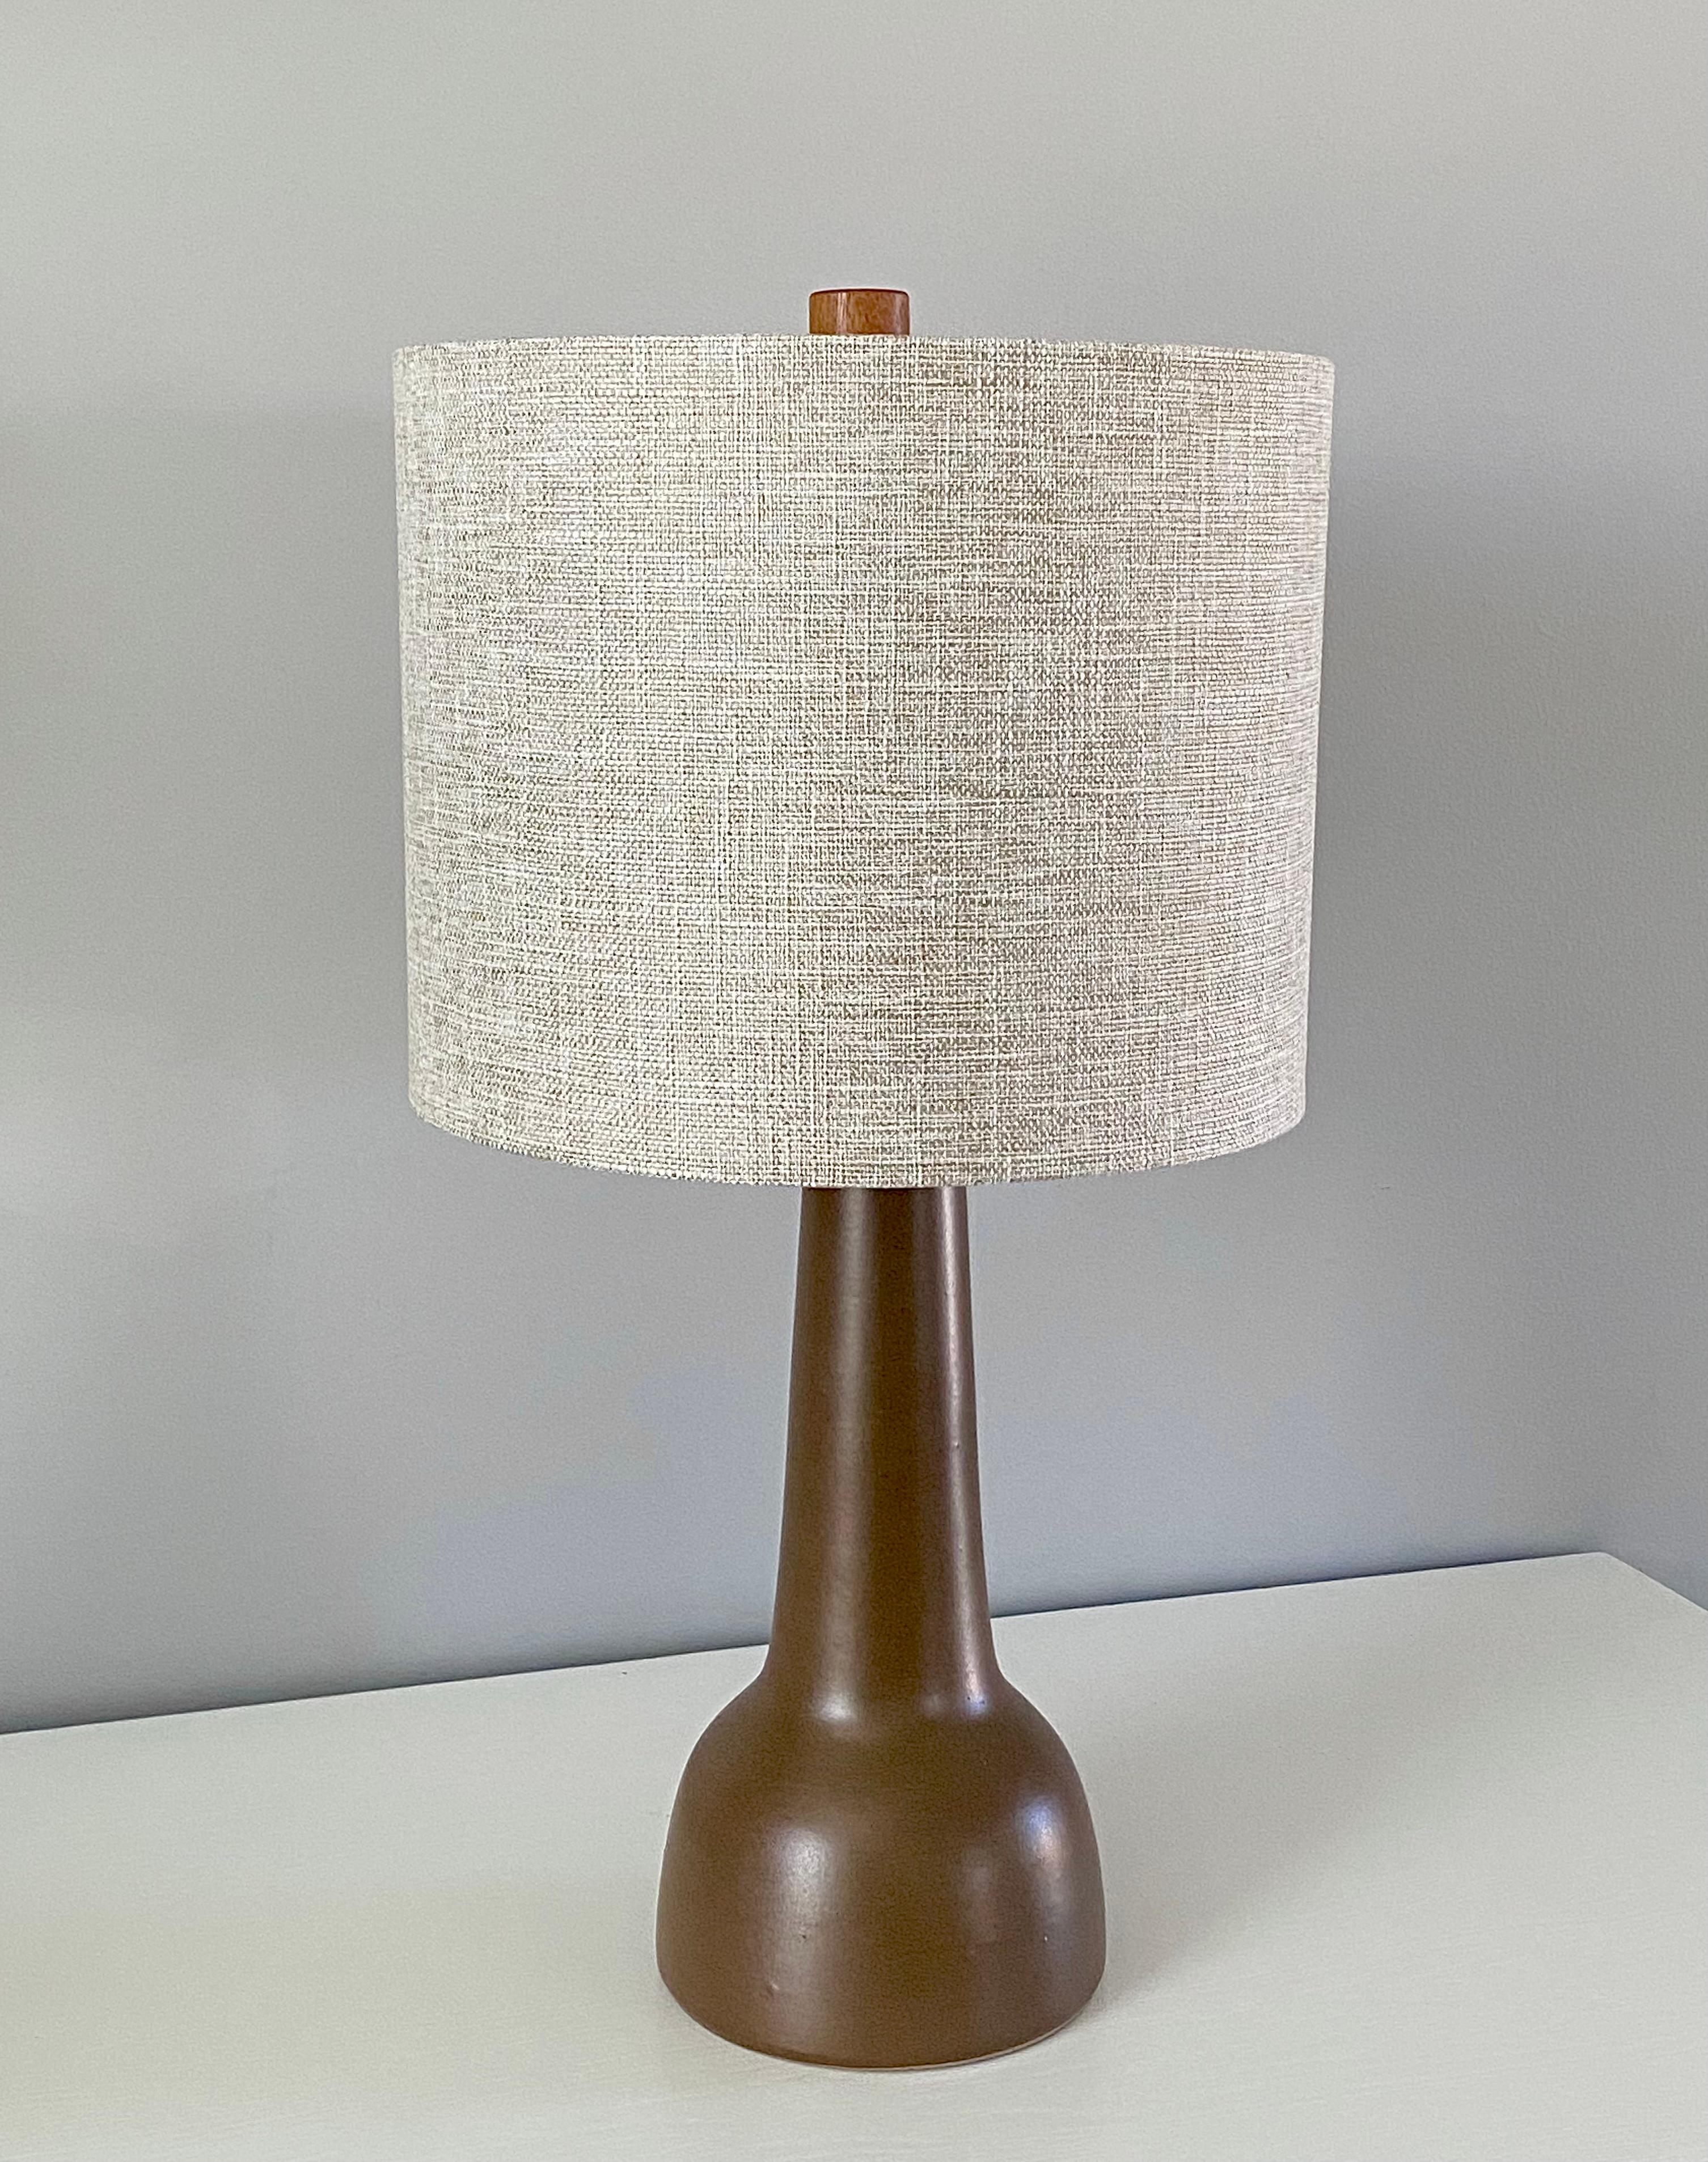 This minimalist organic table lamp is designed by the famed husband and wife duo, Jane & Gordon Martz. The color is a speckled earth tone brown with a lovely delicate aged patina. The base is signed and in excellent condition. The lamp is sold